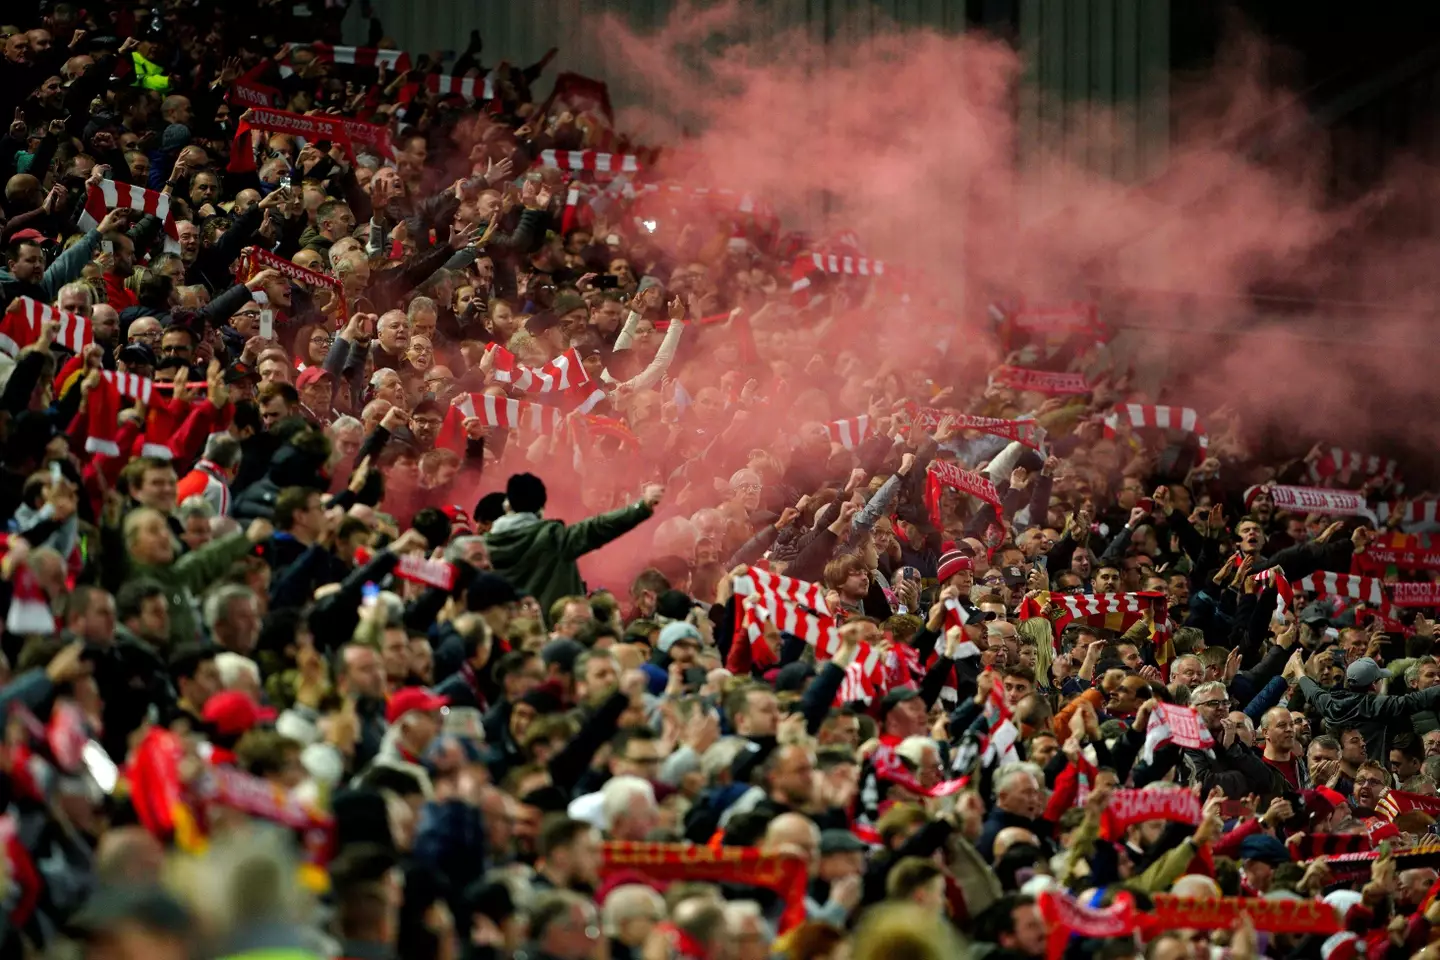 Supporters inside Anfield last year. (Image